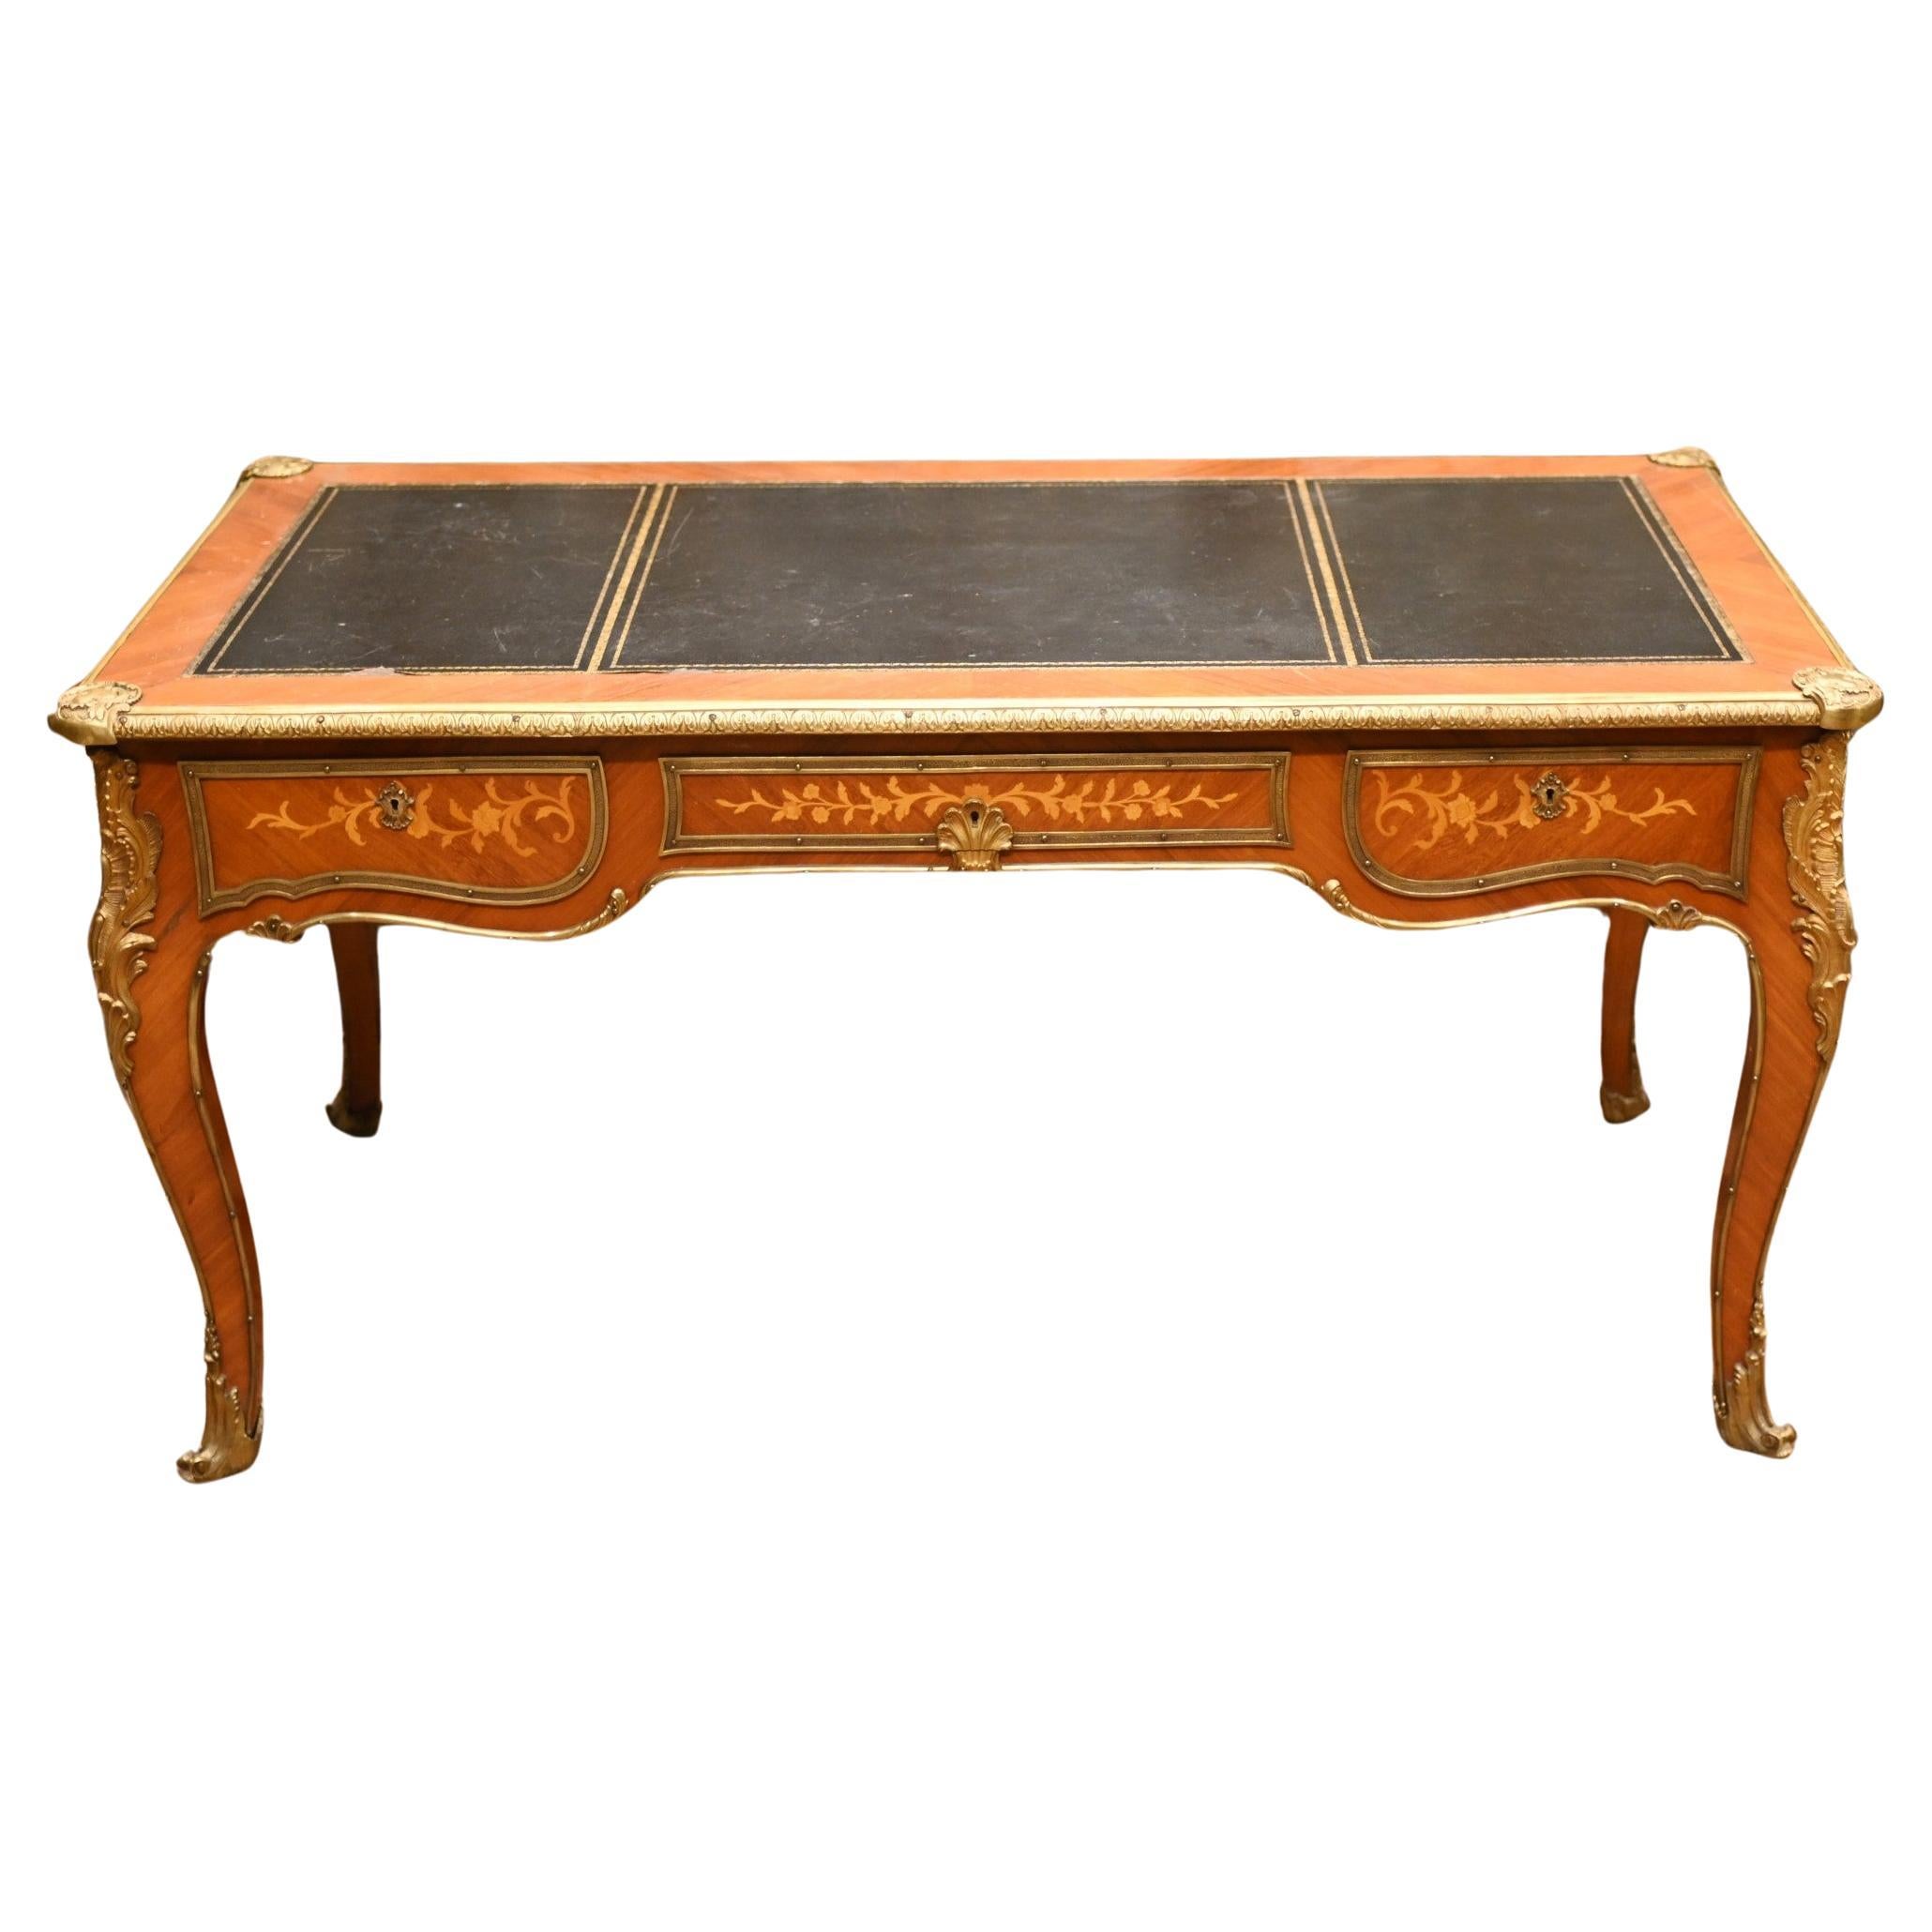 Antique Bureau Plat French Inlay Desk Writing Table For Sale